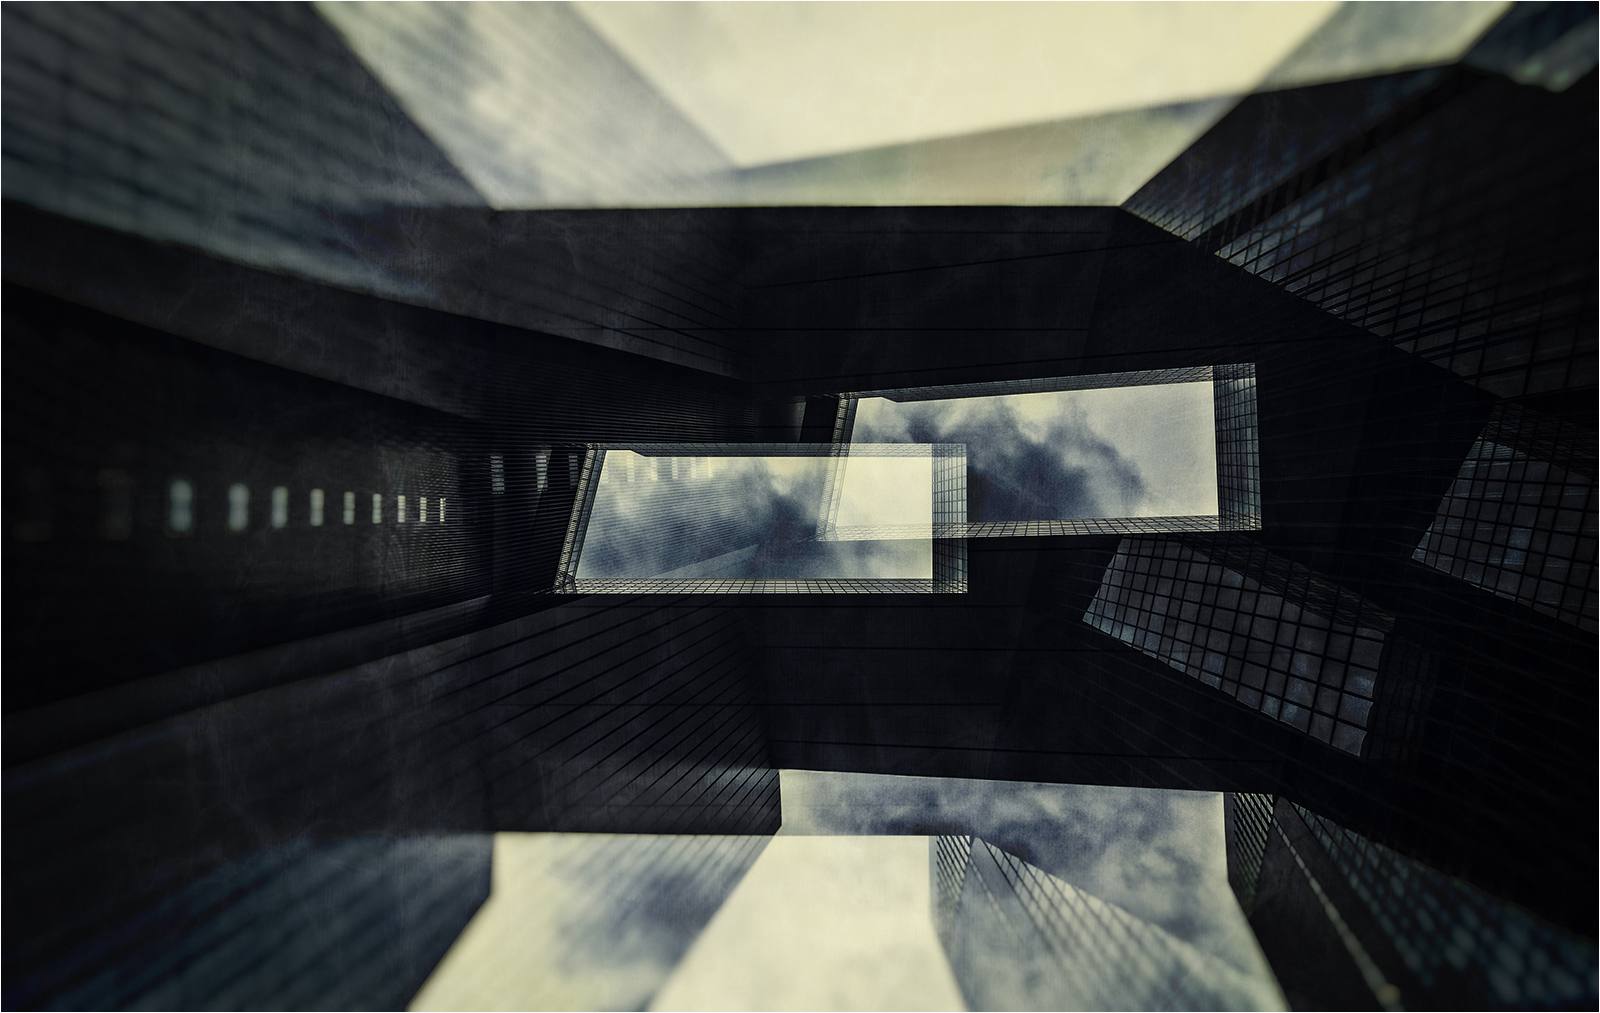 'Abstract Structure' by Rob Kershaw ARPS